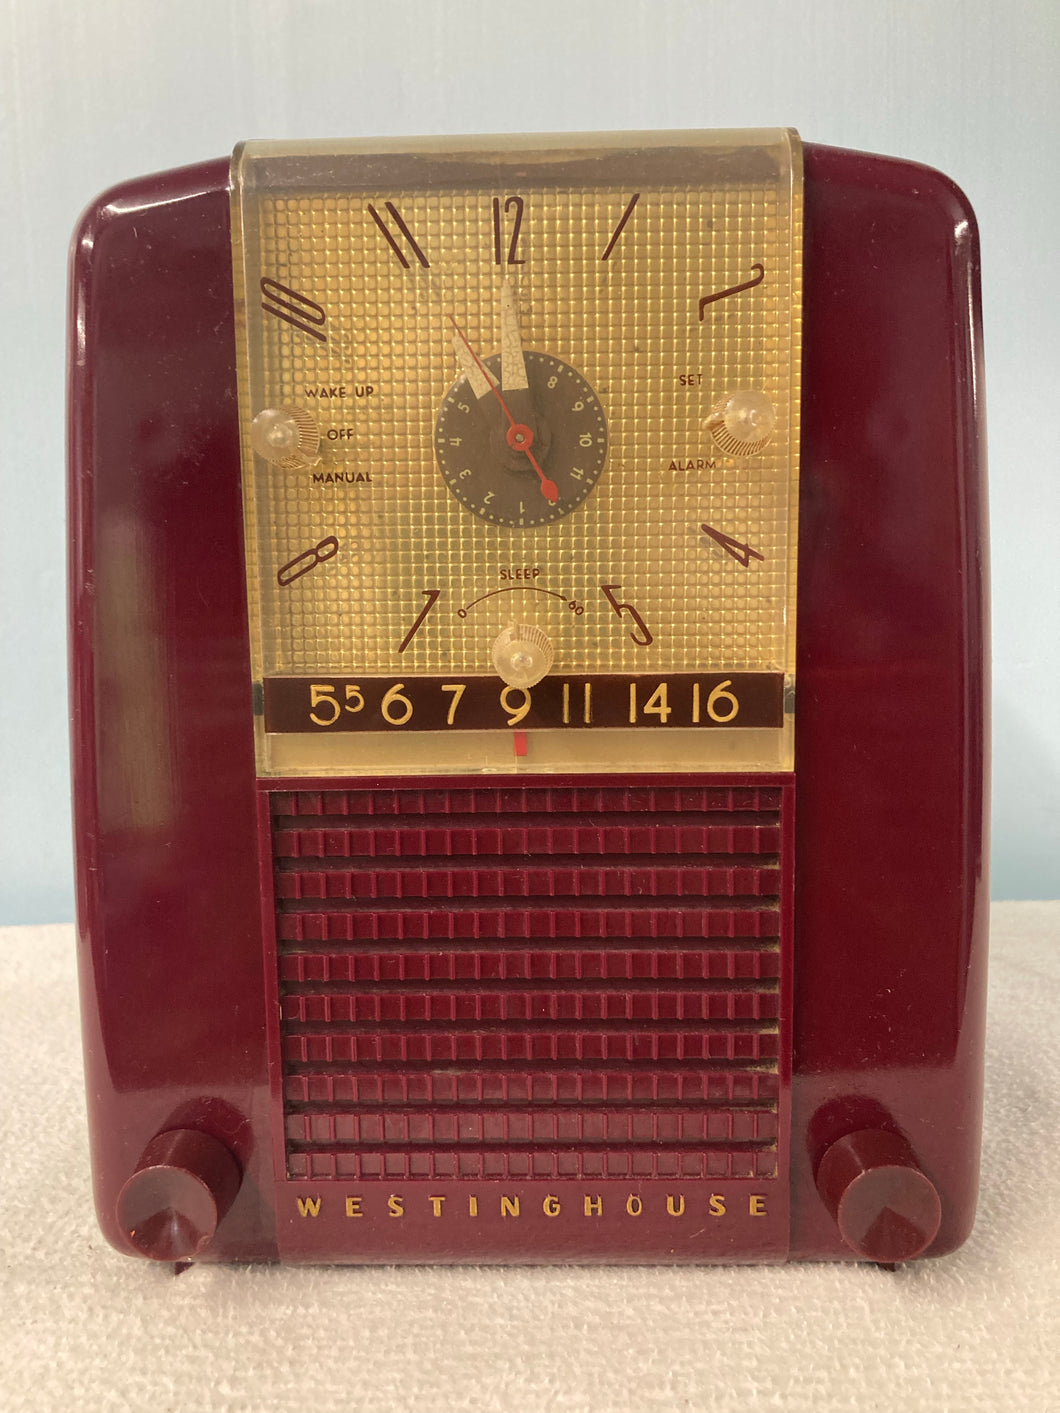 1954 Westinghouse H-397T5 Tube Radio With Bluetooth & FM Options